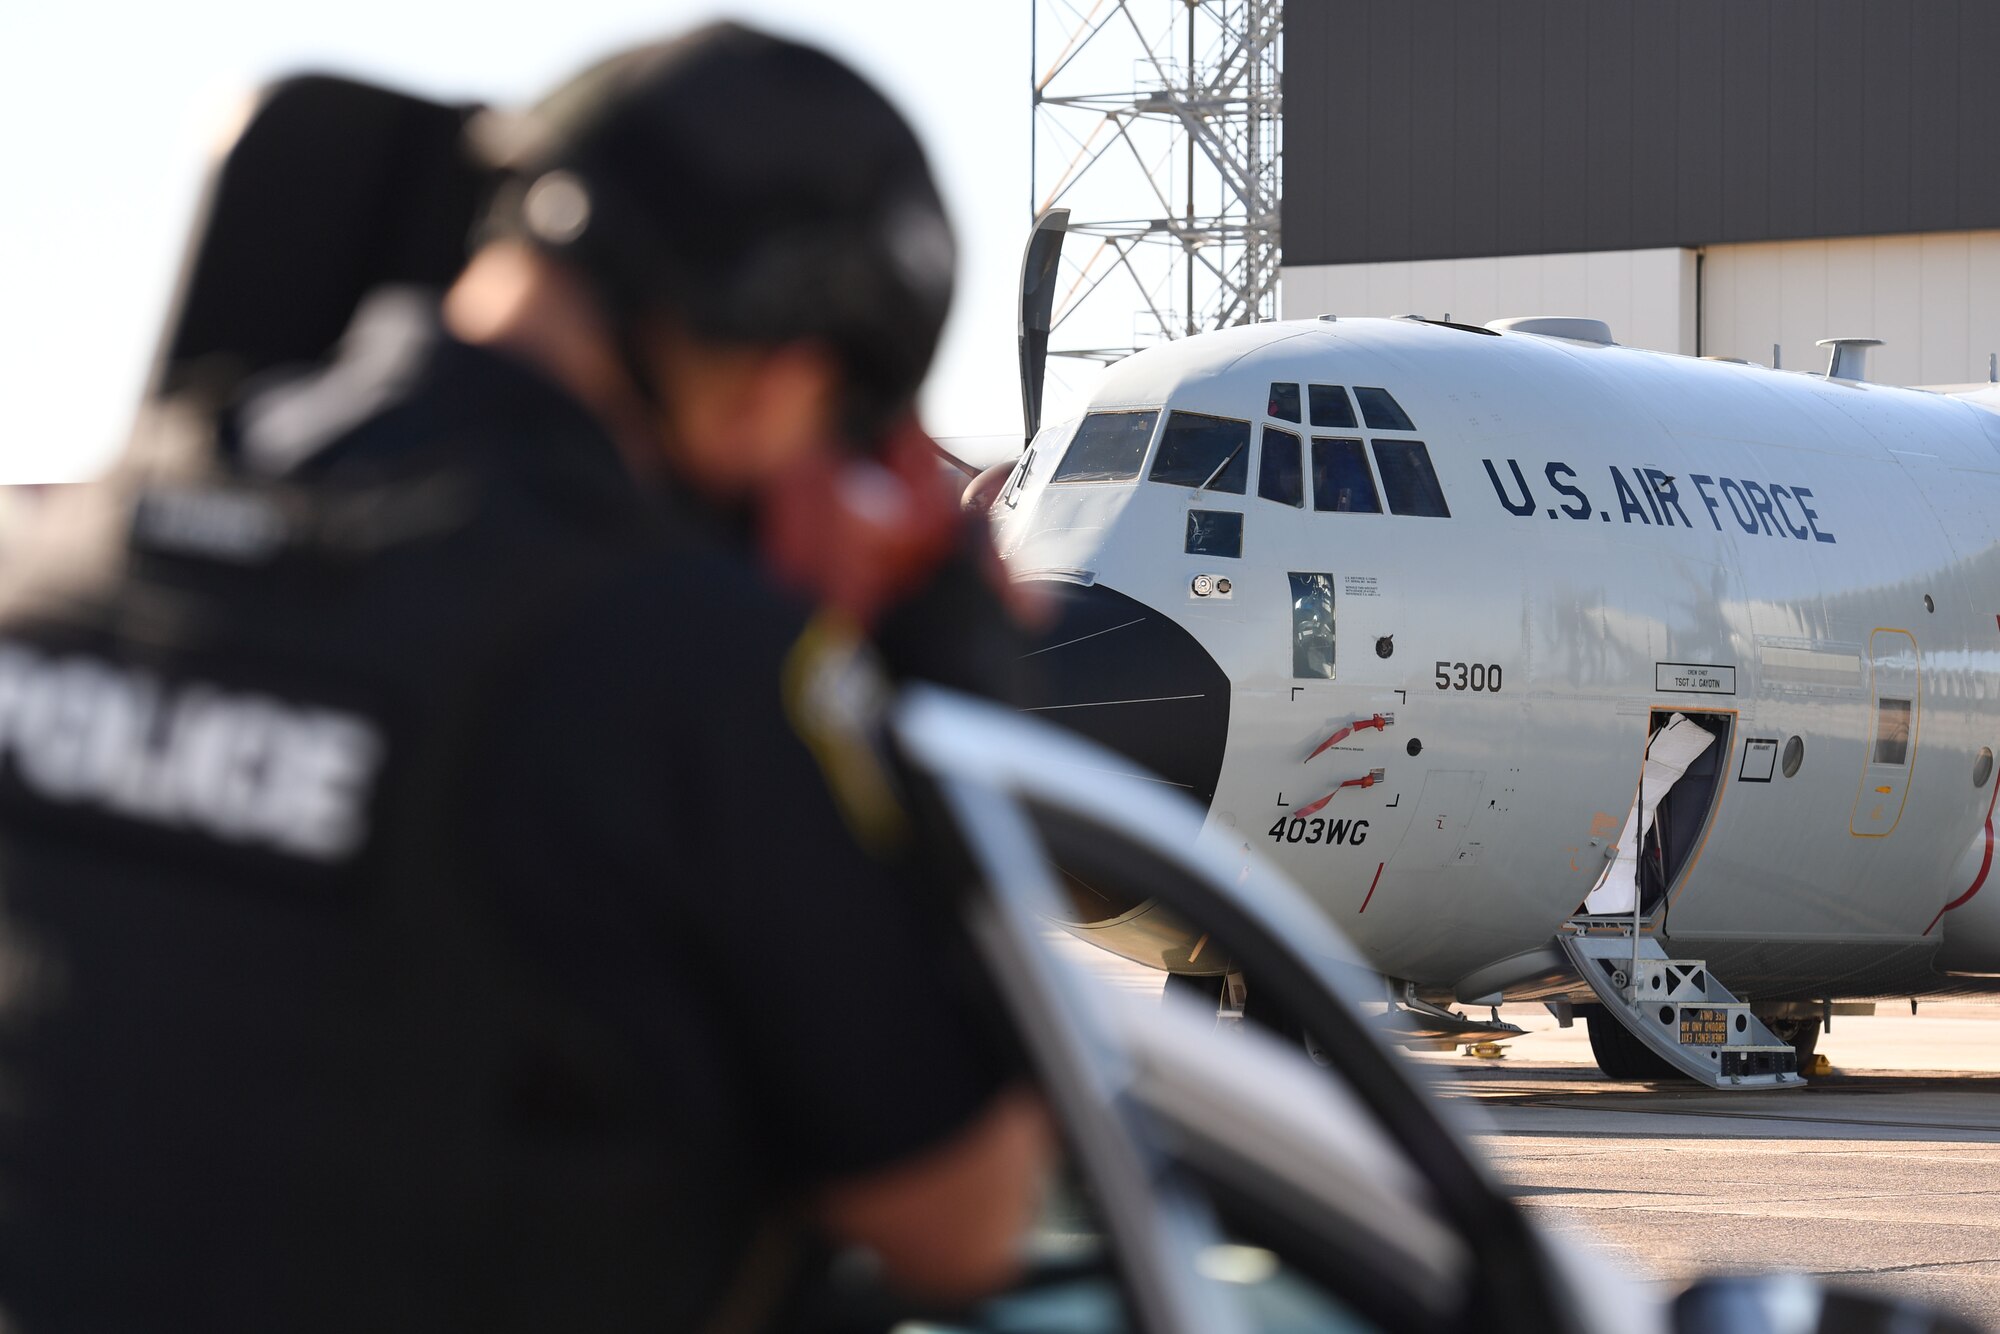 Officer Adam Barnes, 81st Security Forces Squadron patrolman, provides security on scene during a hijacking exercise at Keesler Air Force Base, Mississippi, Dec. 15, 2022.